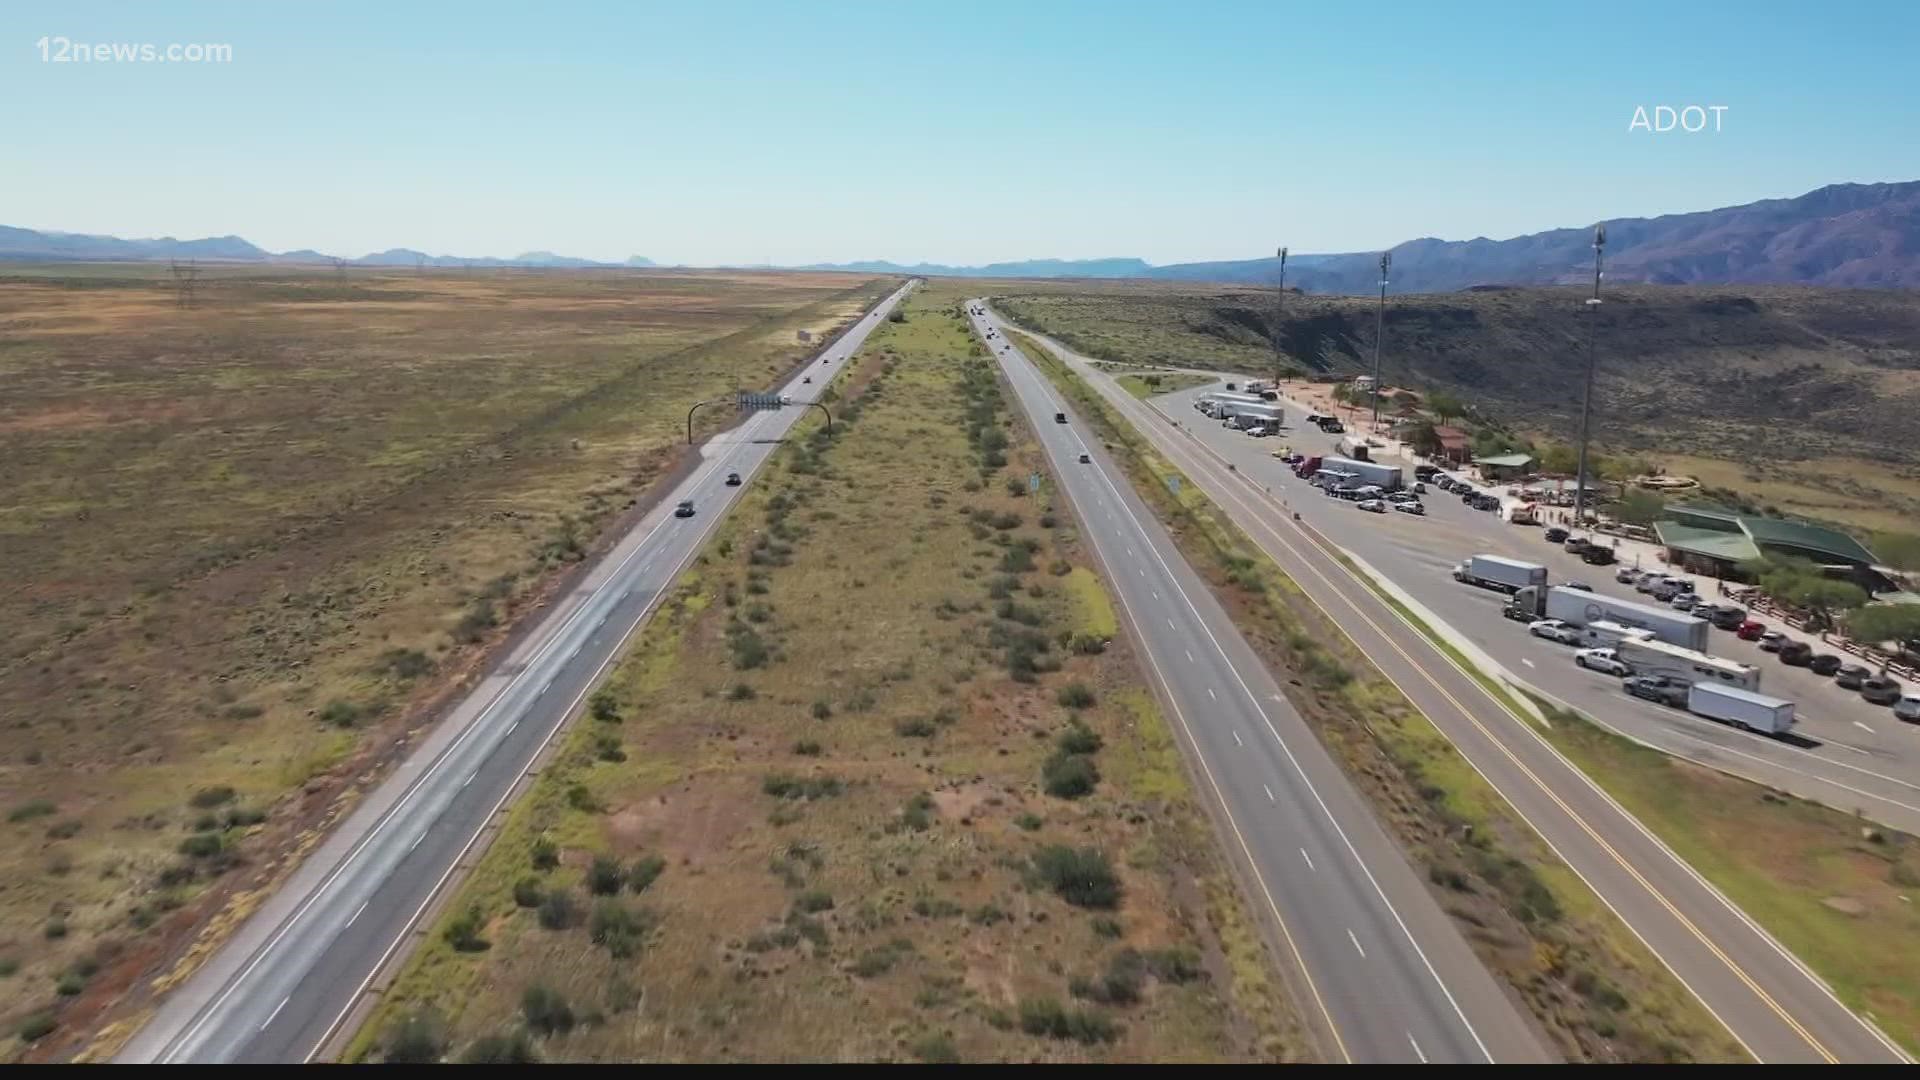 The project will add lanes to the interstate from Anthem to Black Canyon City. Also, "flex lanes" will be added from Black Canyon City to Sunset Point.